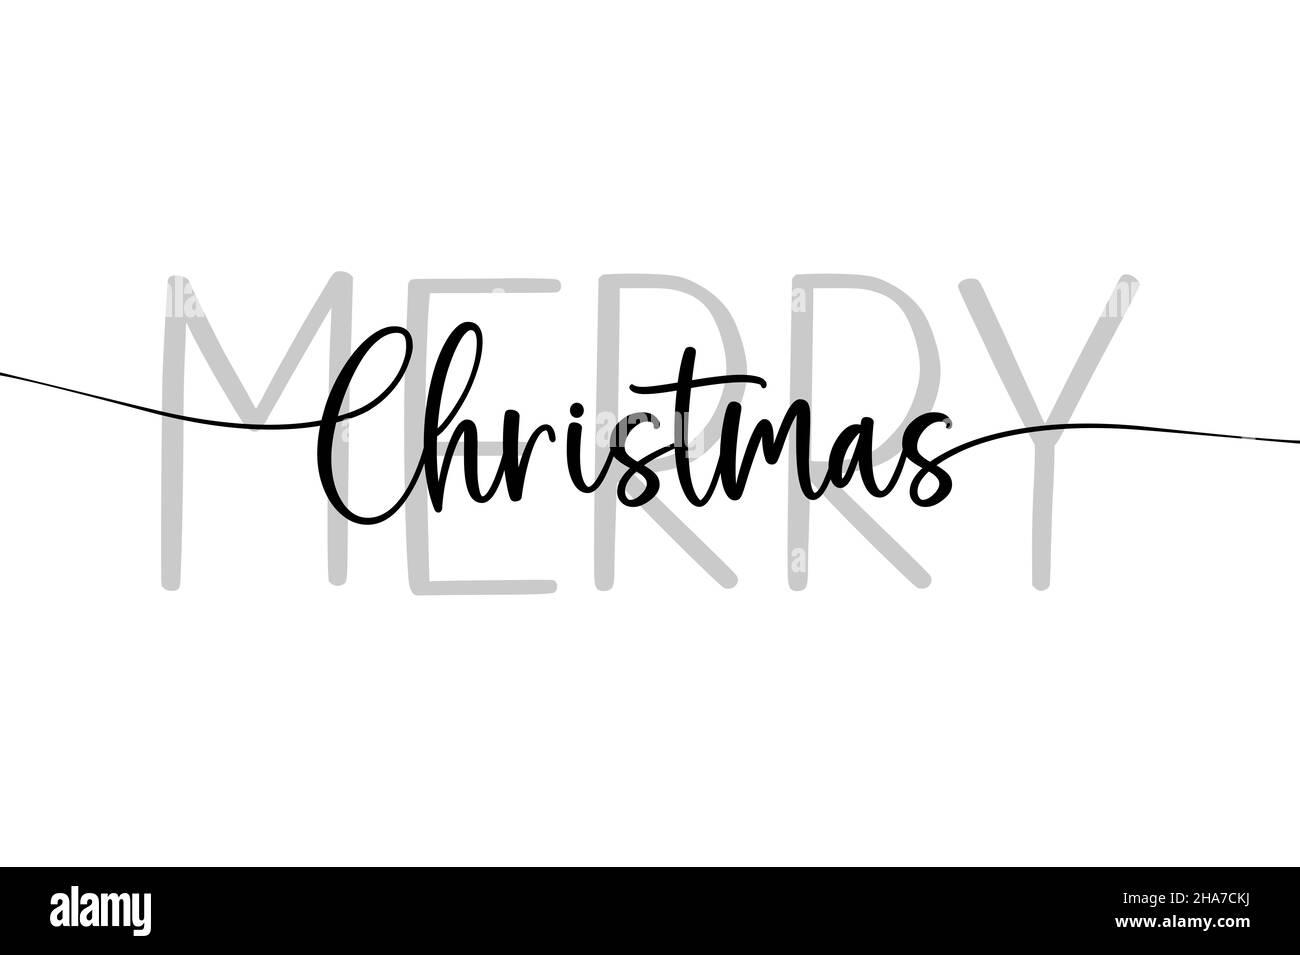 Merry christmas Black and White Stock Photos Images